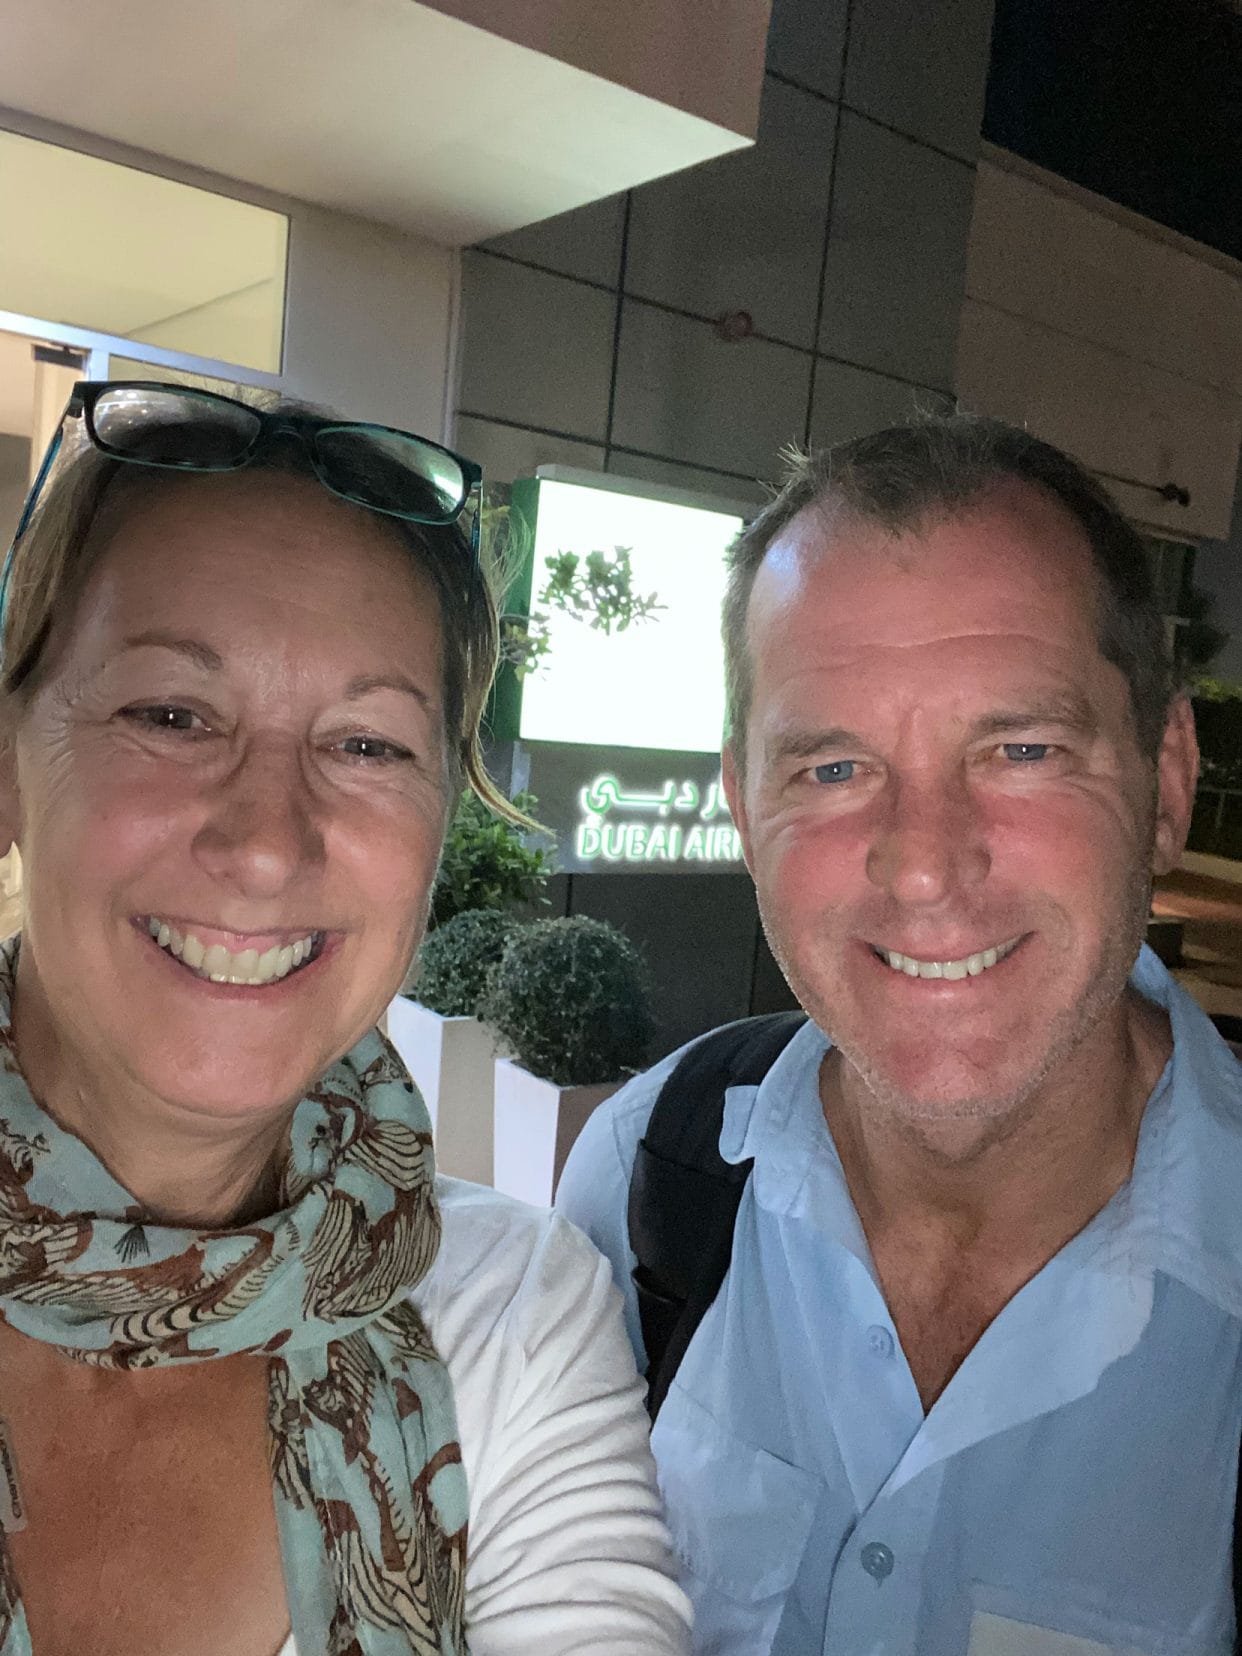 shelley and lars outside the Holiday Inn express in Dubai